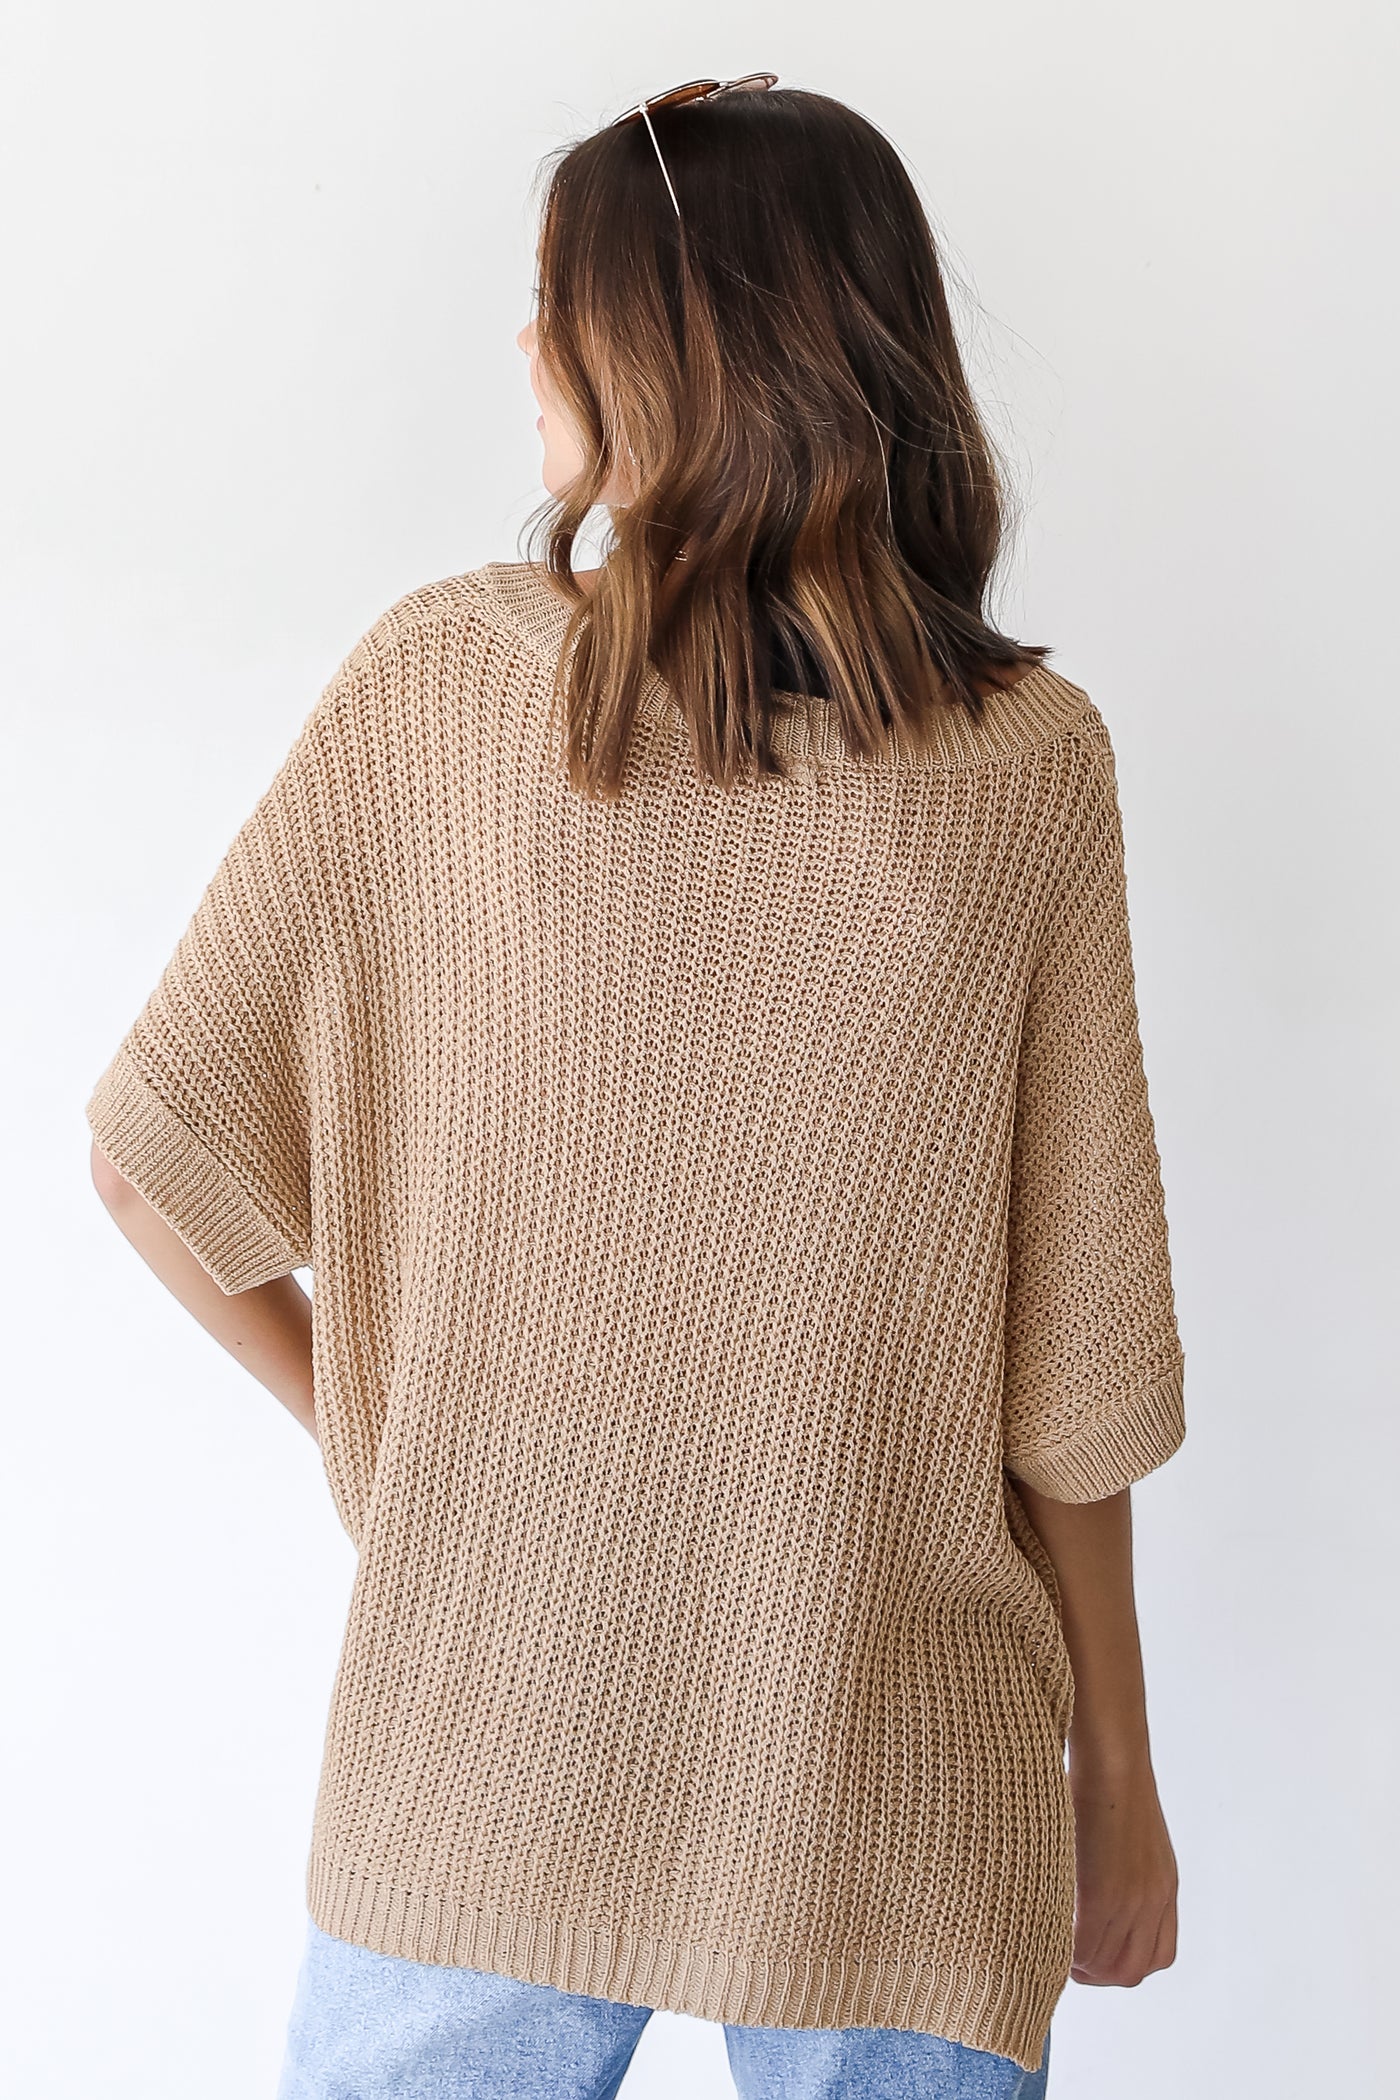 FINAL SALE - Loving Arms Loose Knit Sweater